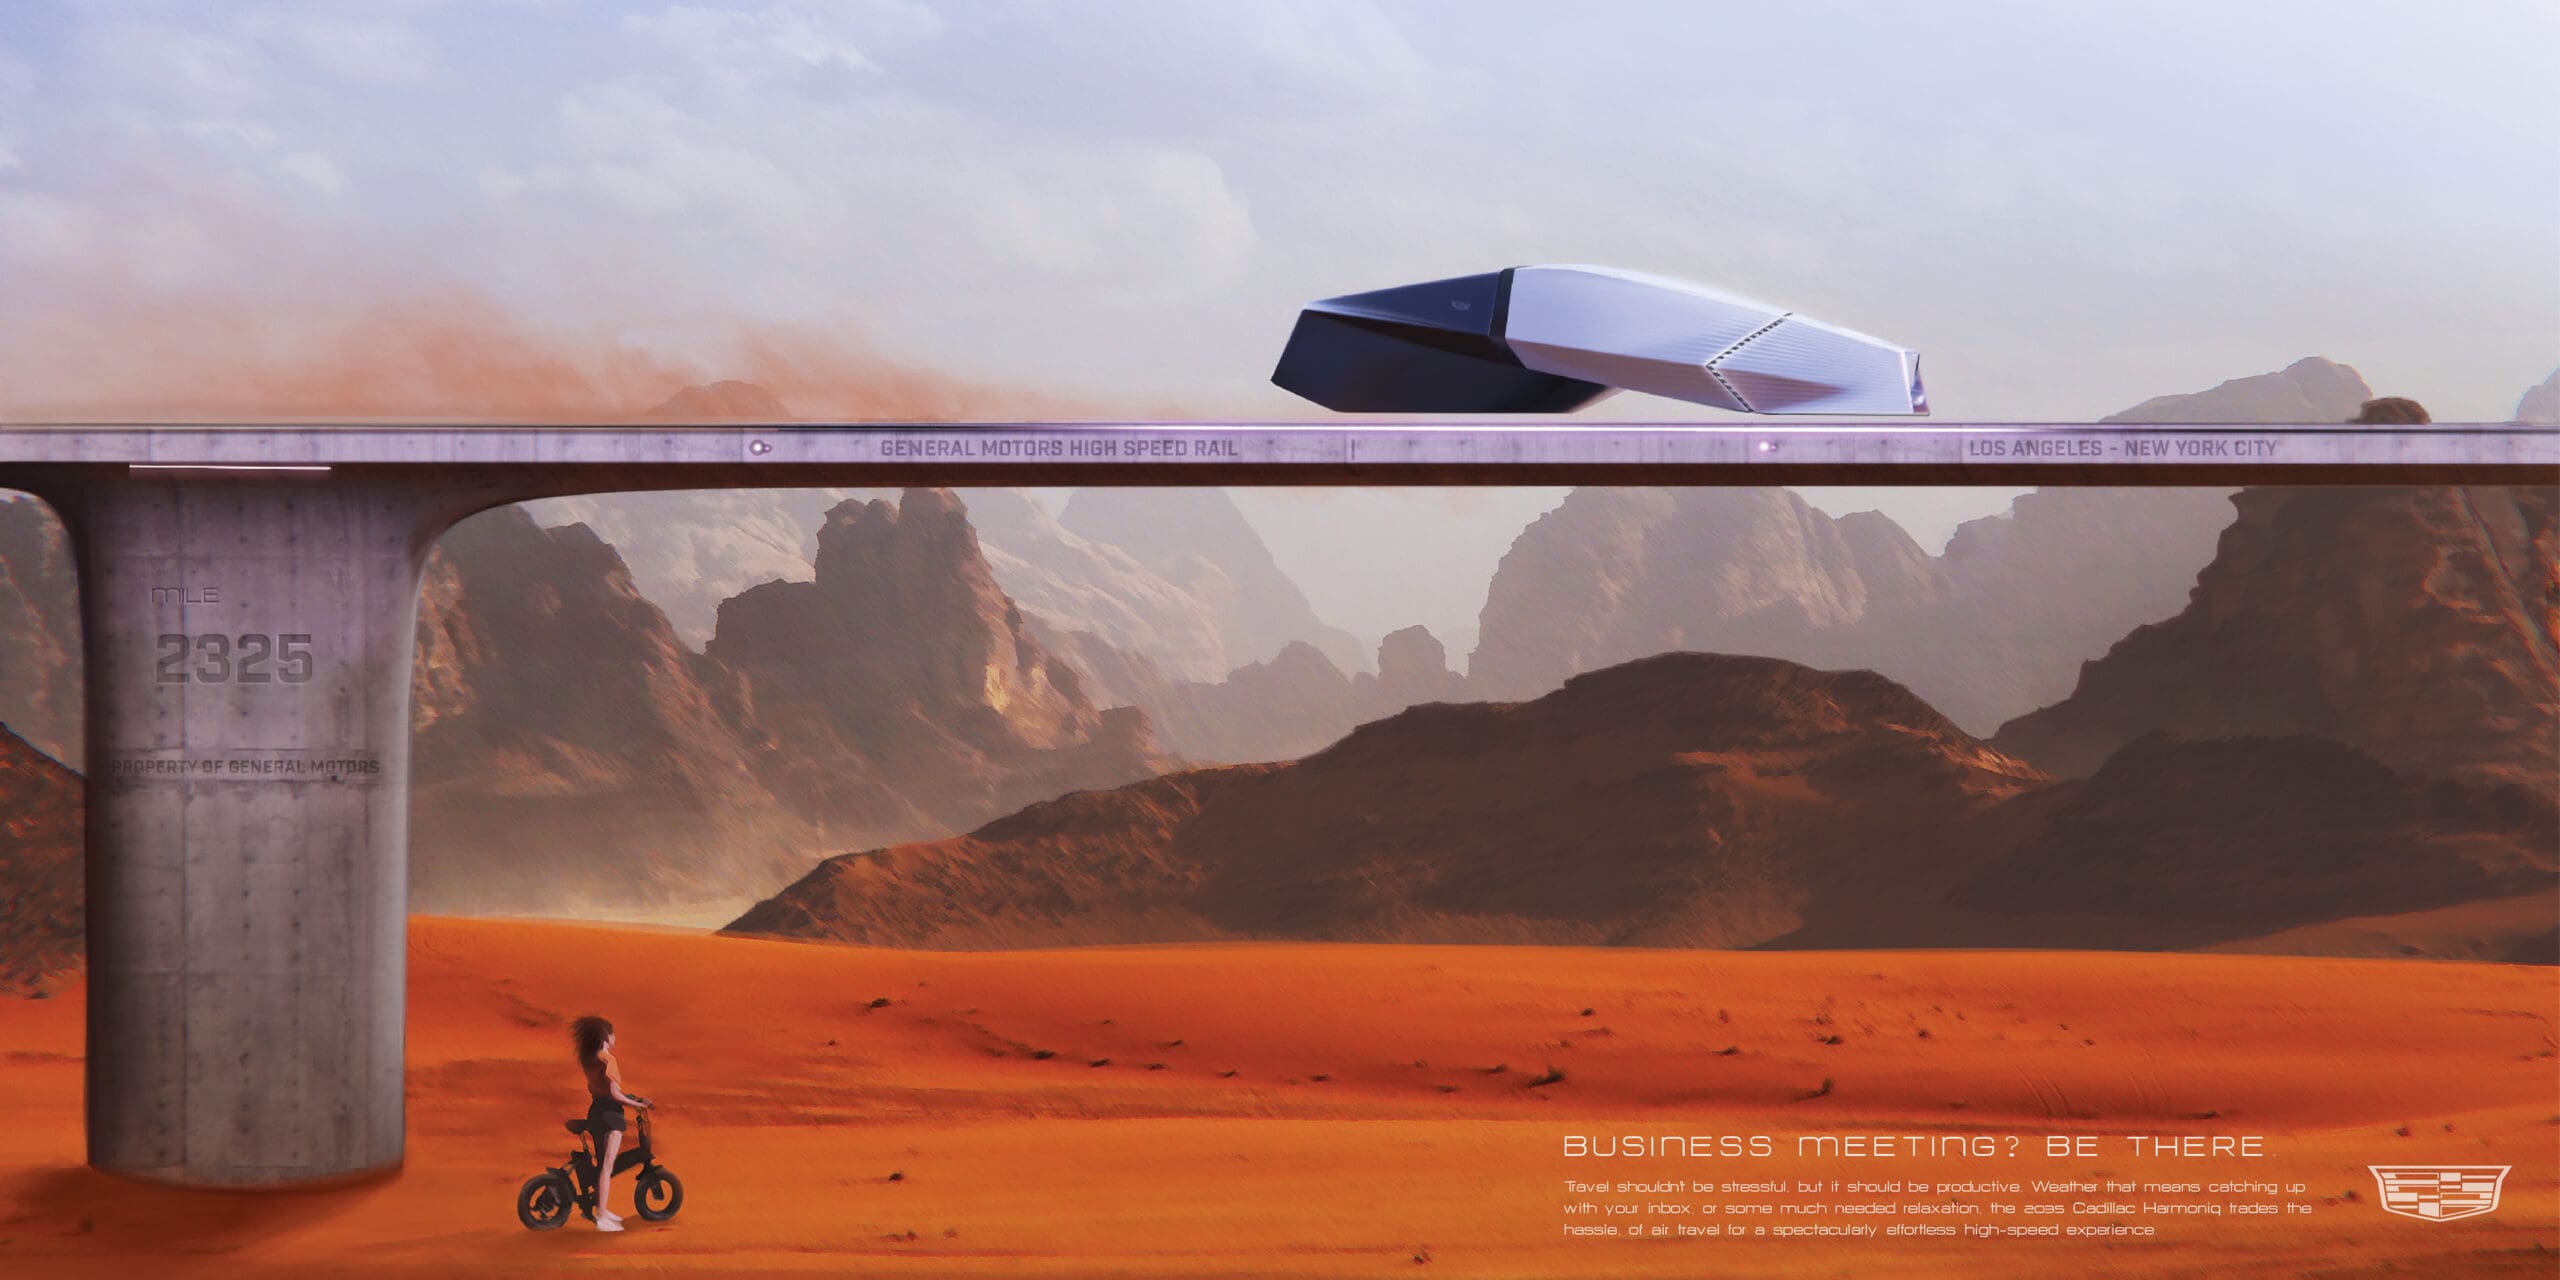 Concept art of a small silver vehicle on a track. Located in an orange desert landscape